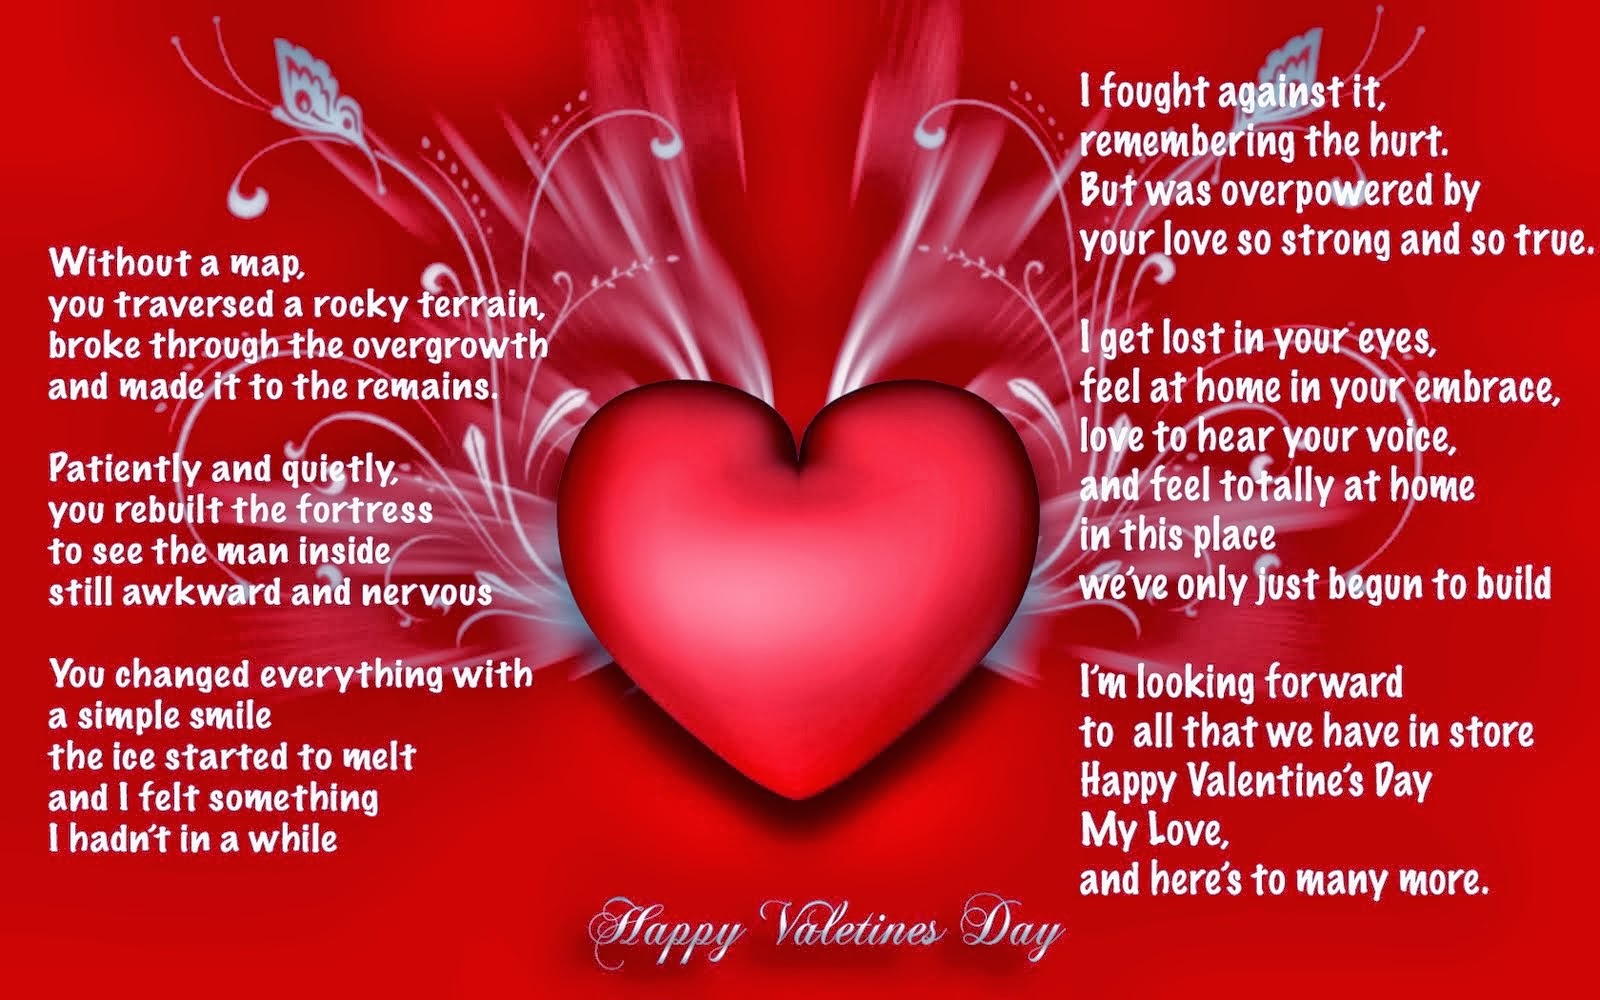 40 Best Valentine Day Messages – The WoW Style1600 x 1000